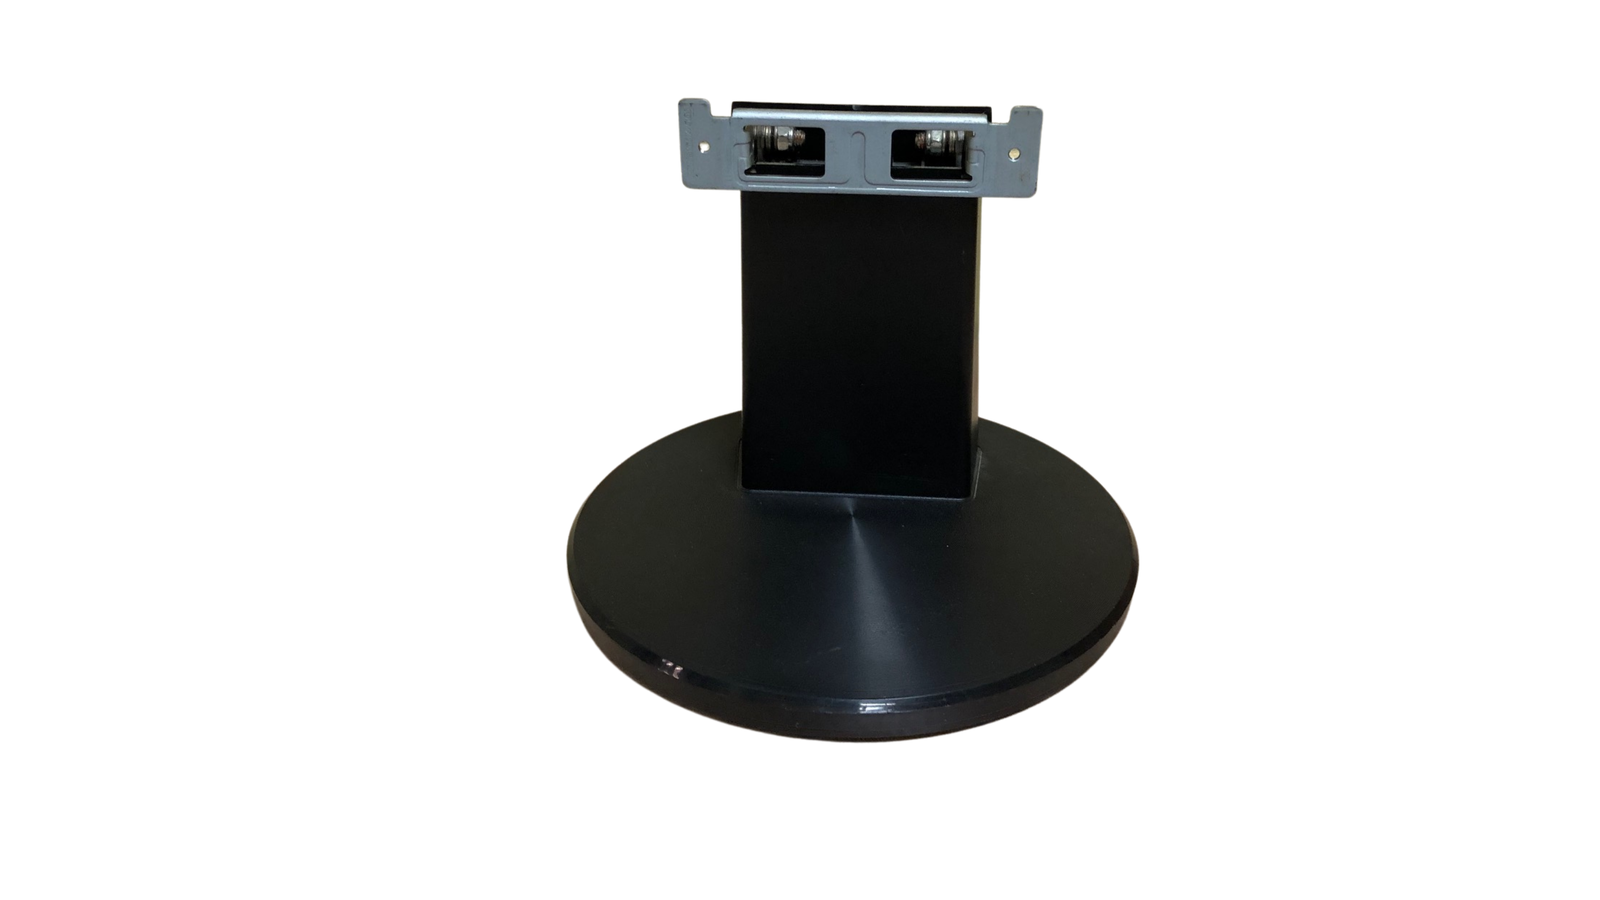 Asus VW225 version VW225N monitor stand